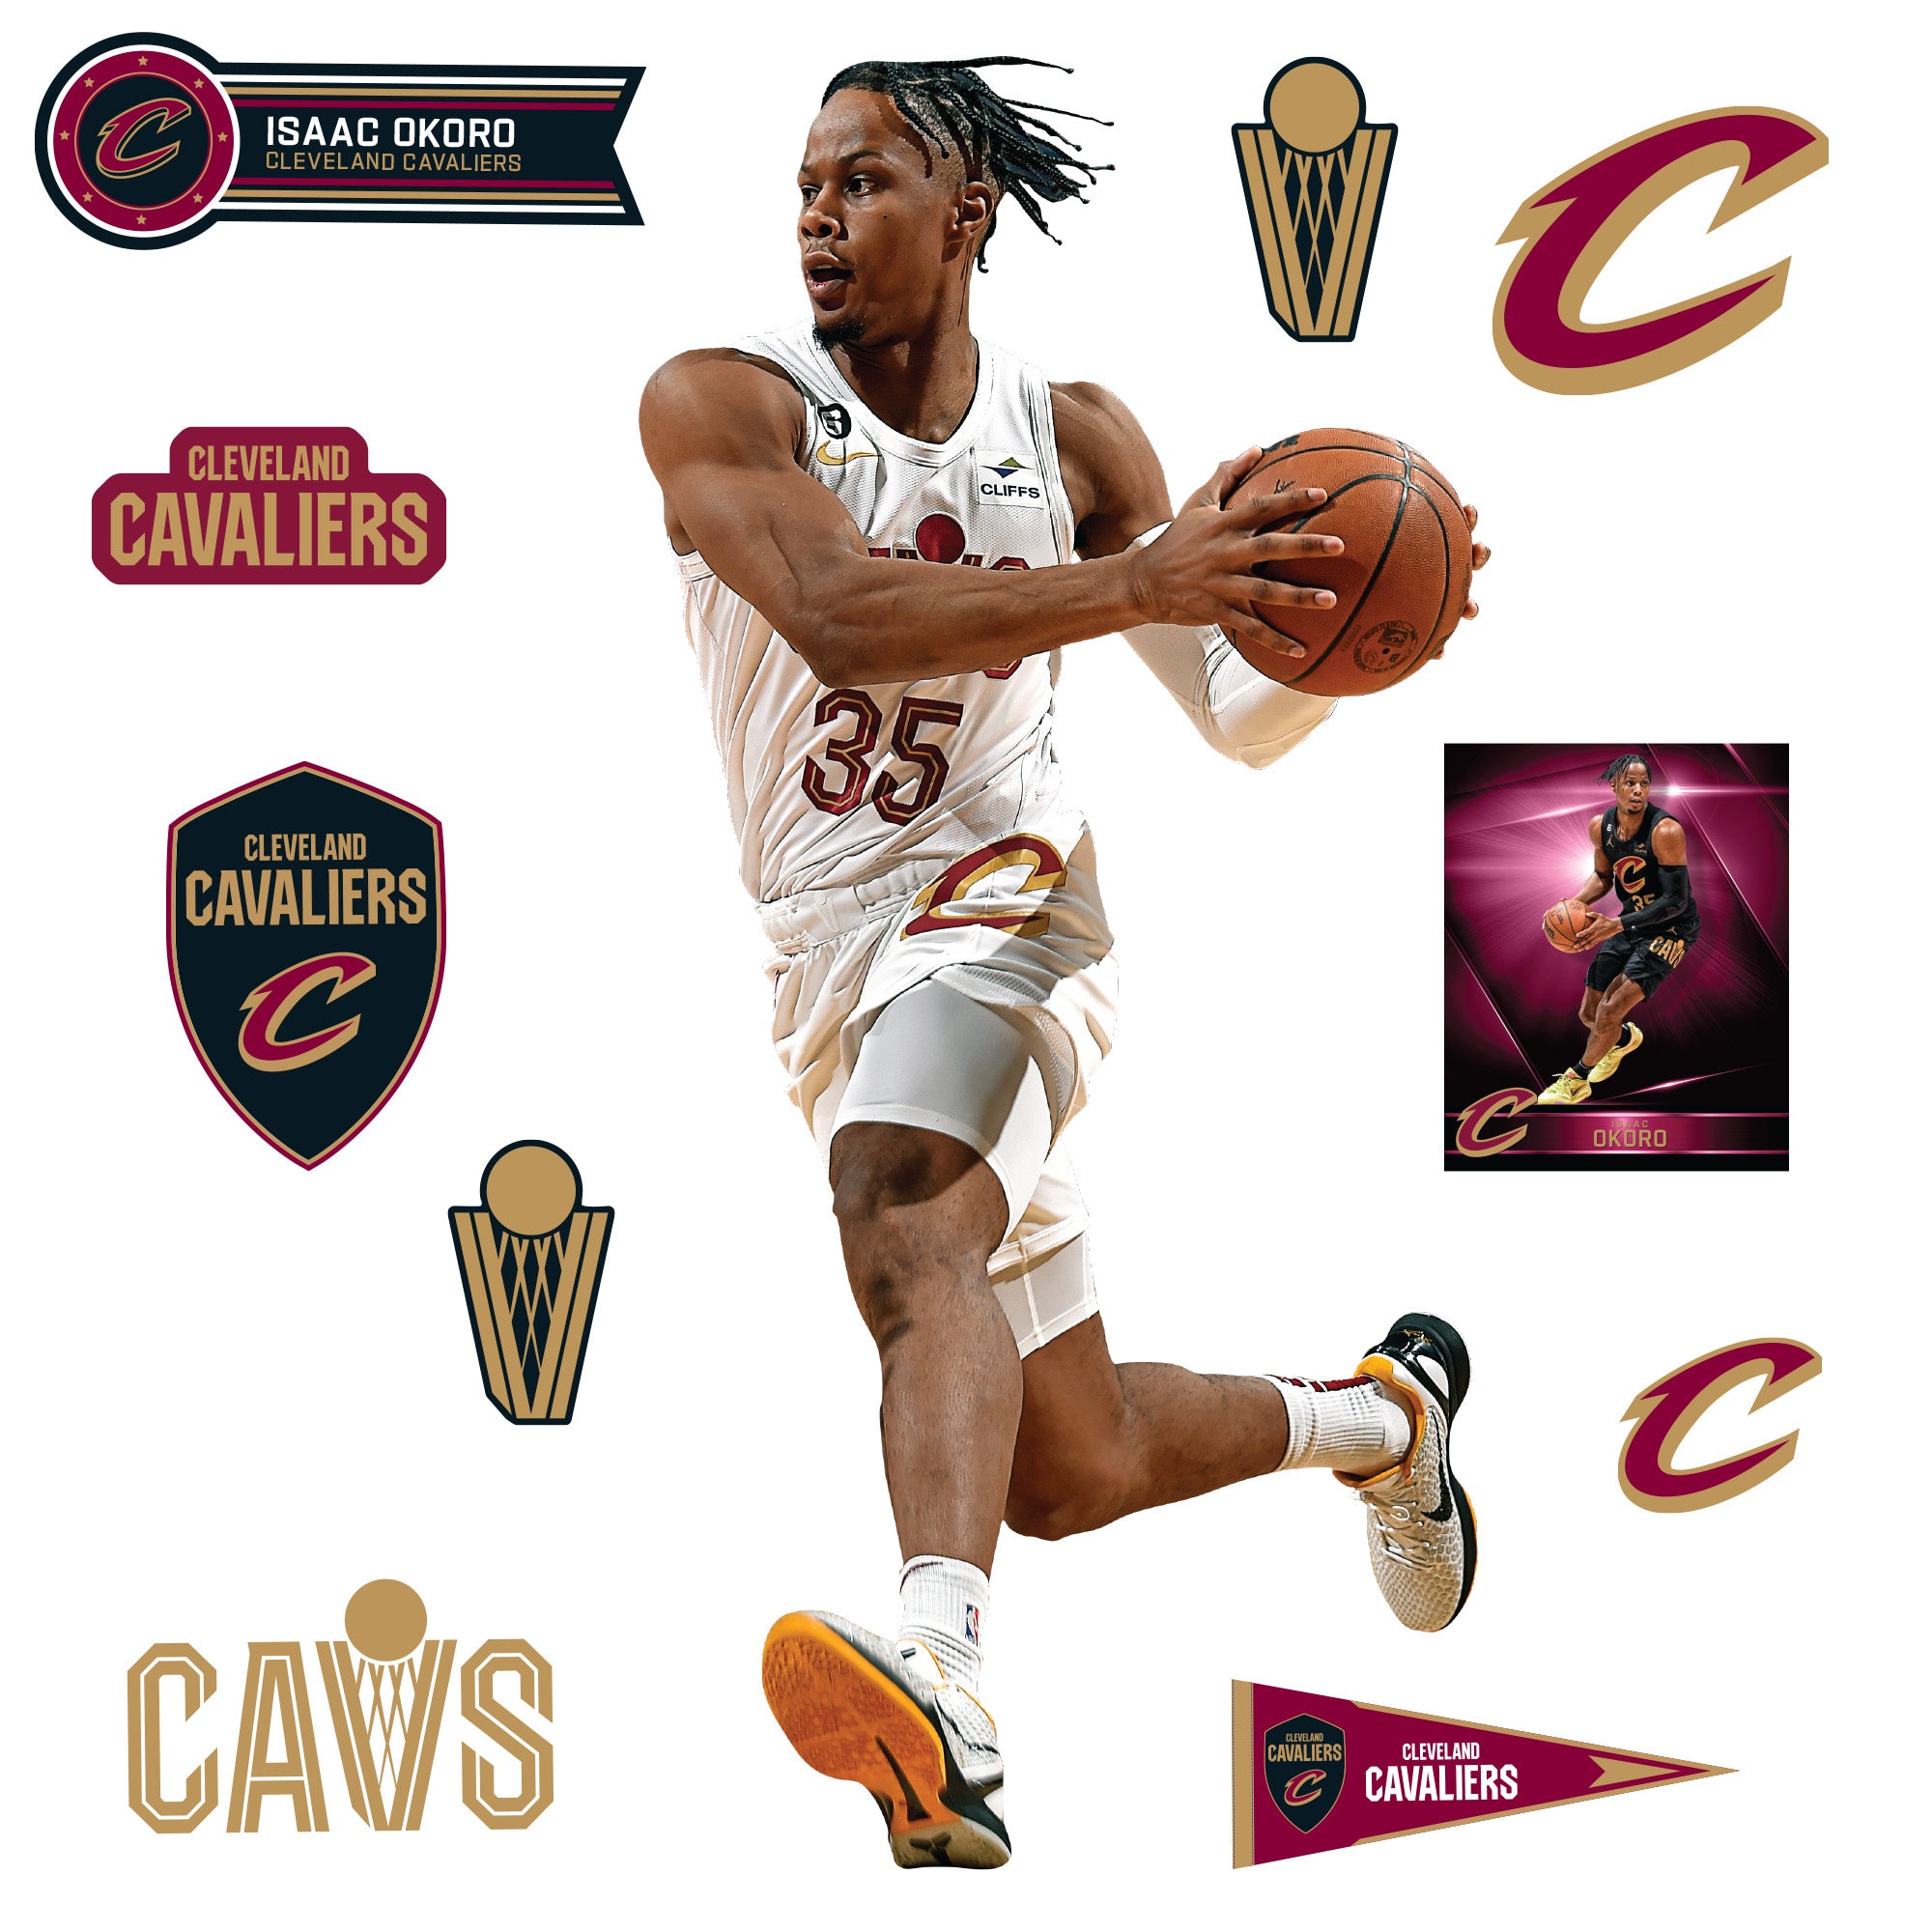 Cleveland Cavaliers: Isaac Okoro - Officially Licensed NBA